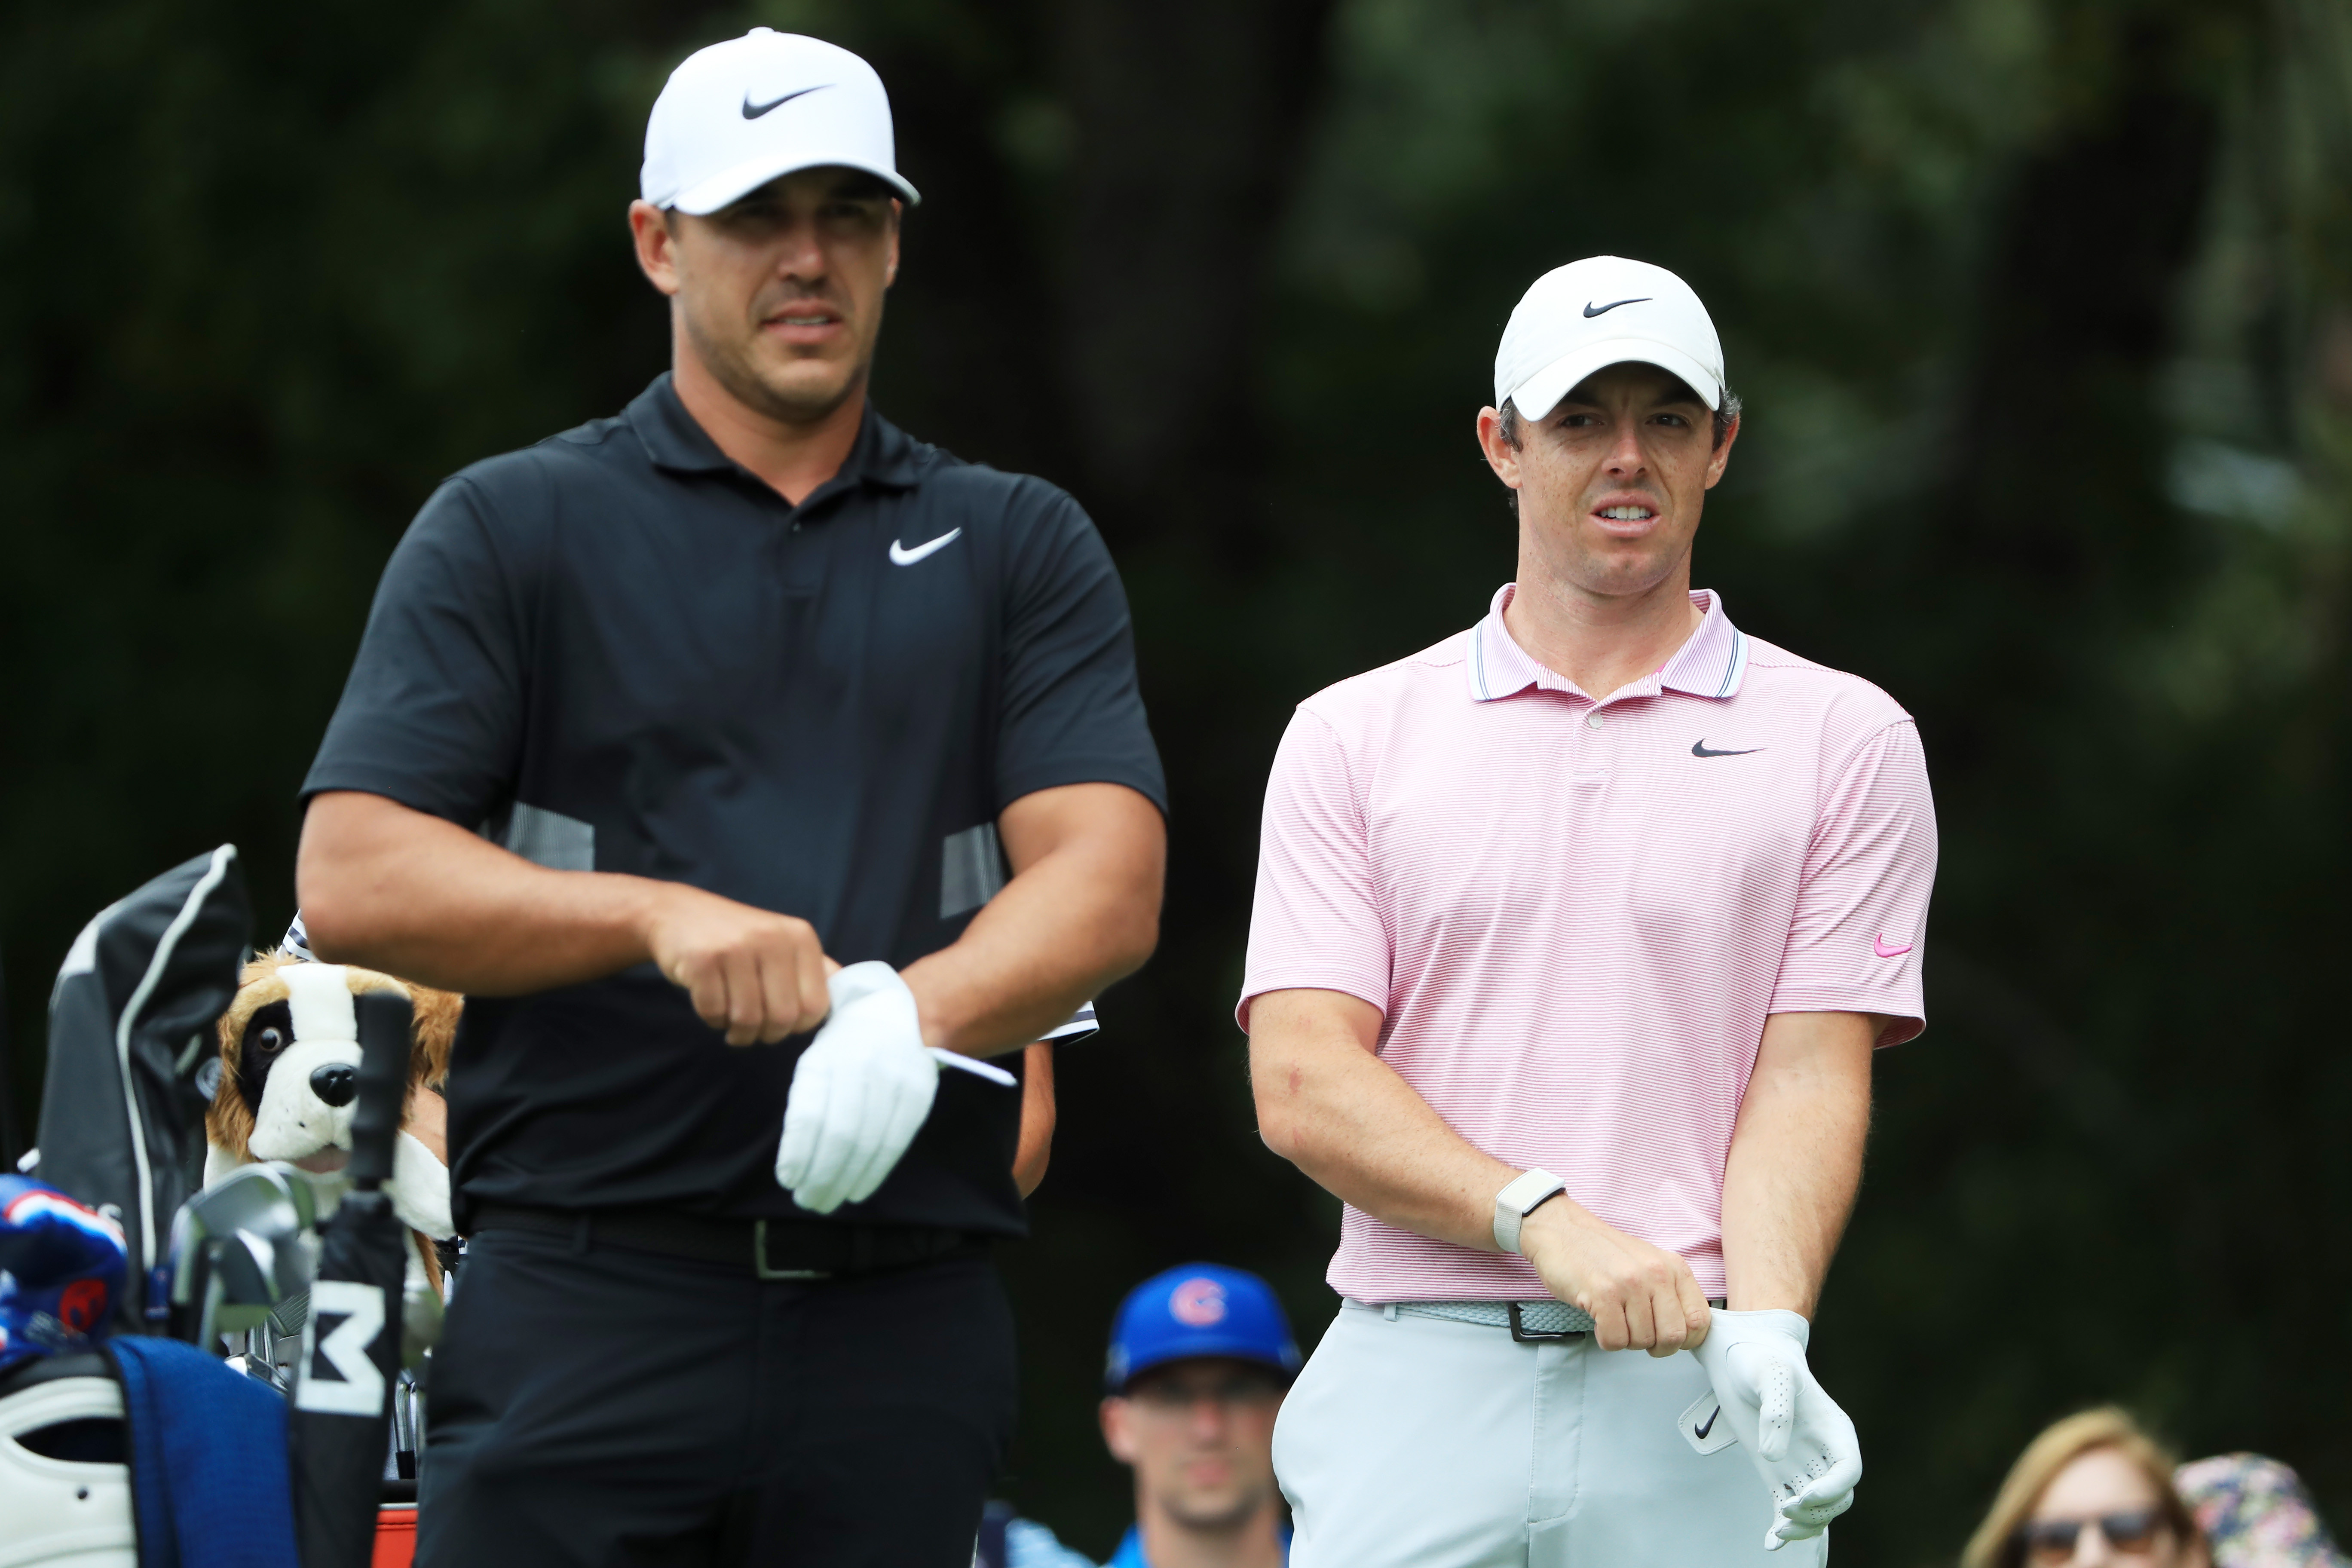 McIlroy, Koepka paired together at US Open